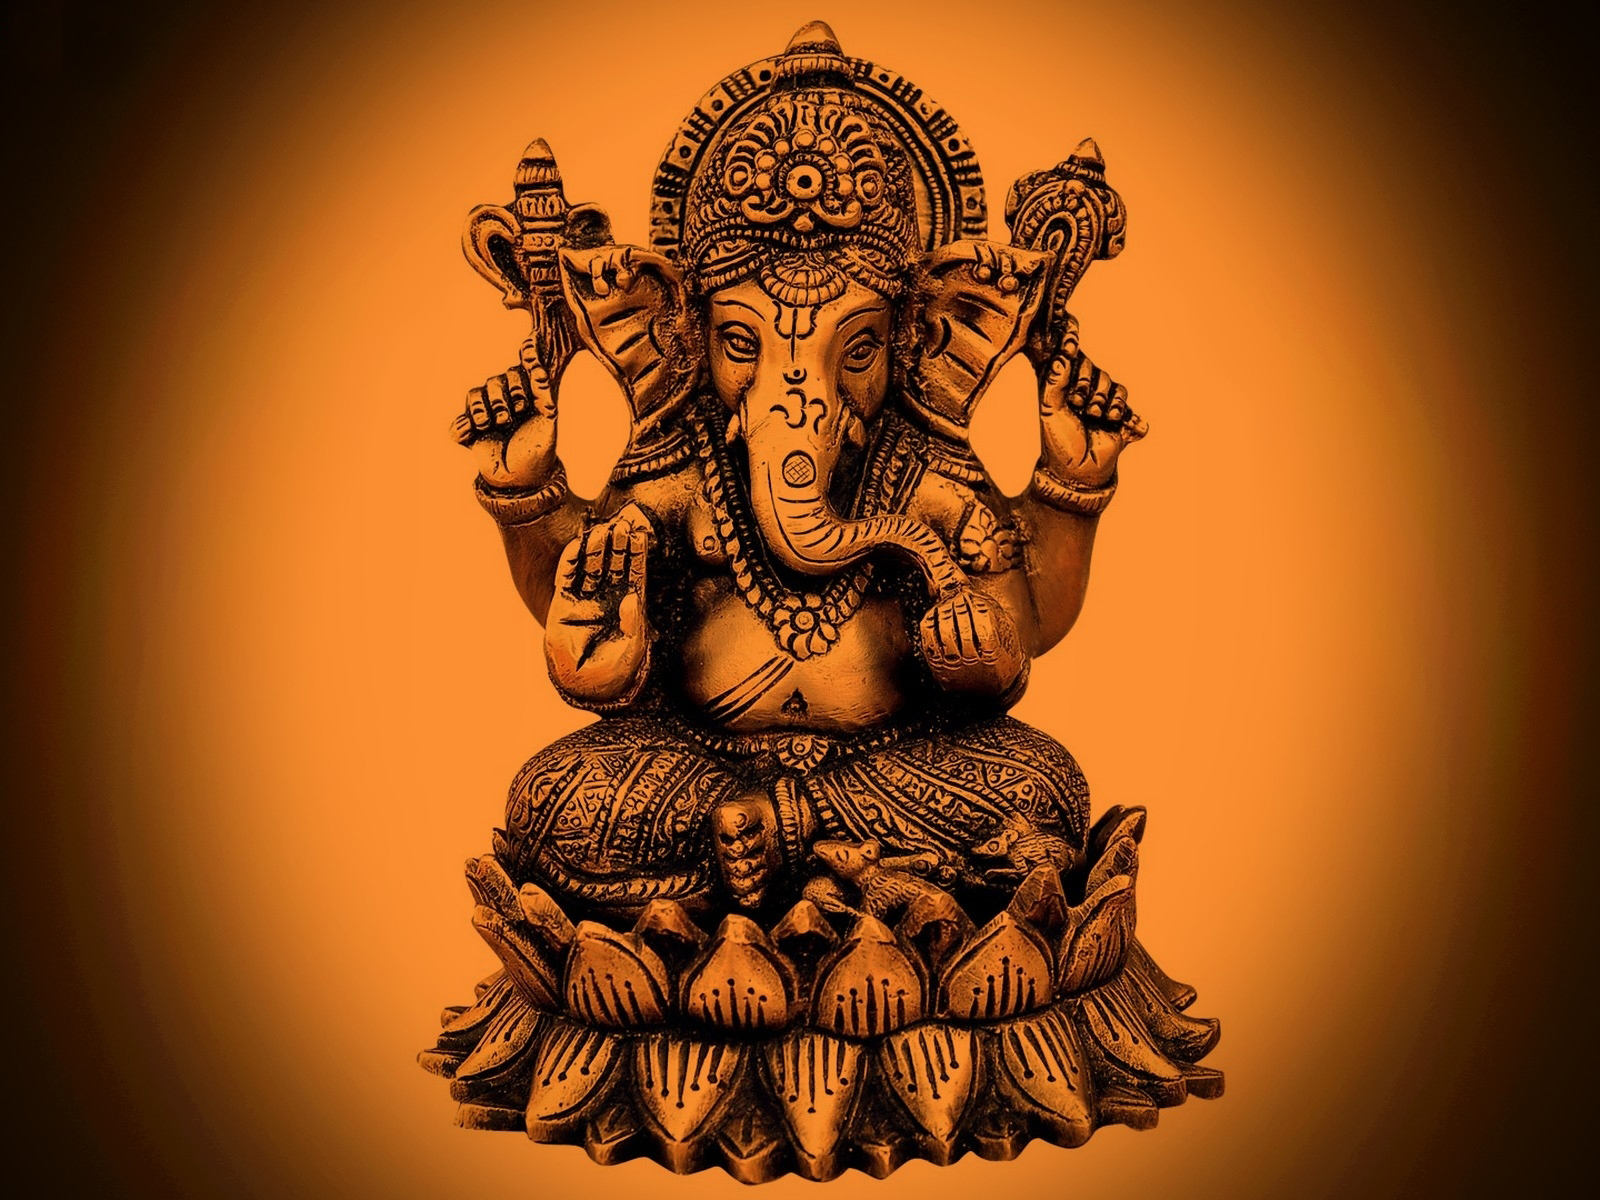 51+ Lord Ganesha Images For Send Blessings